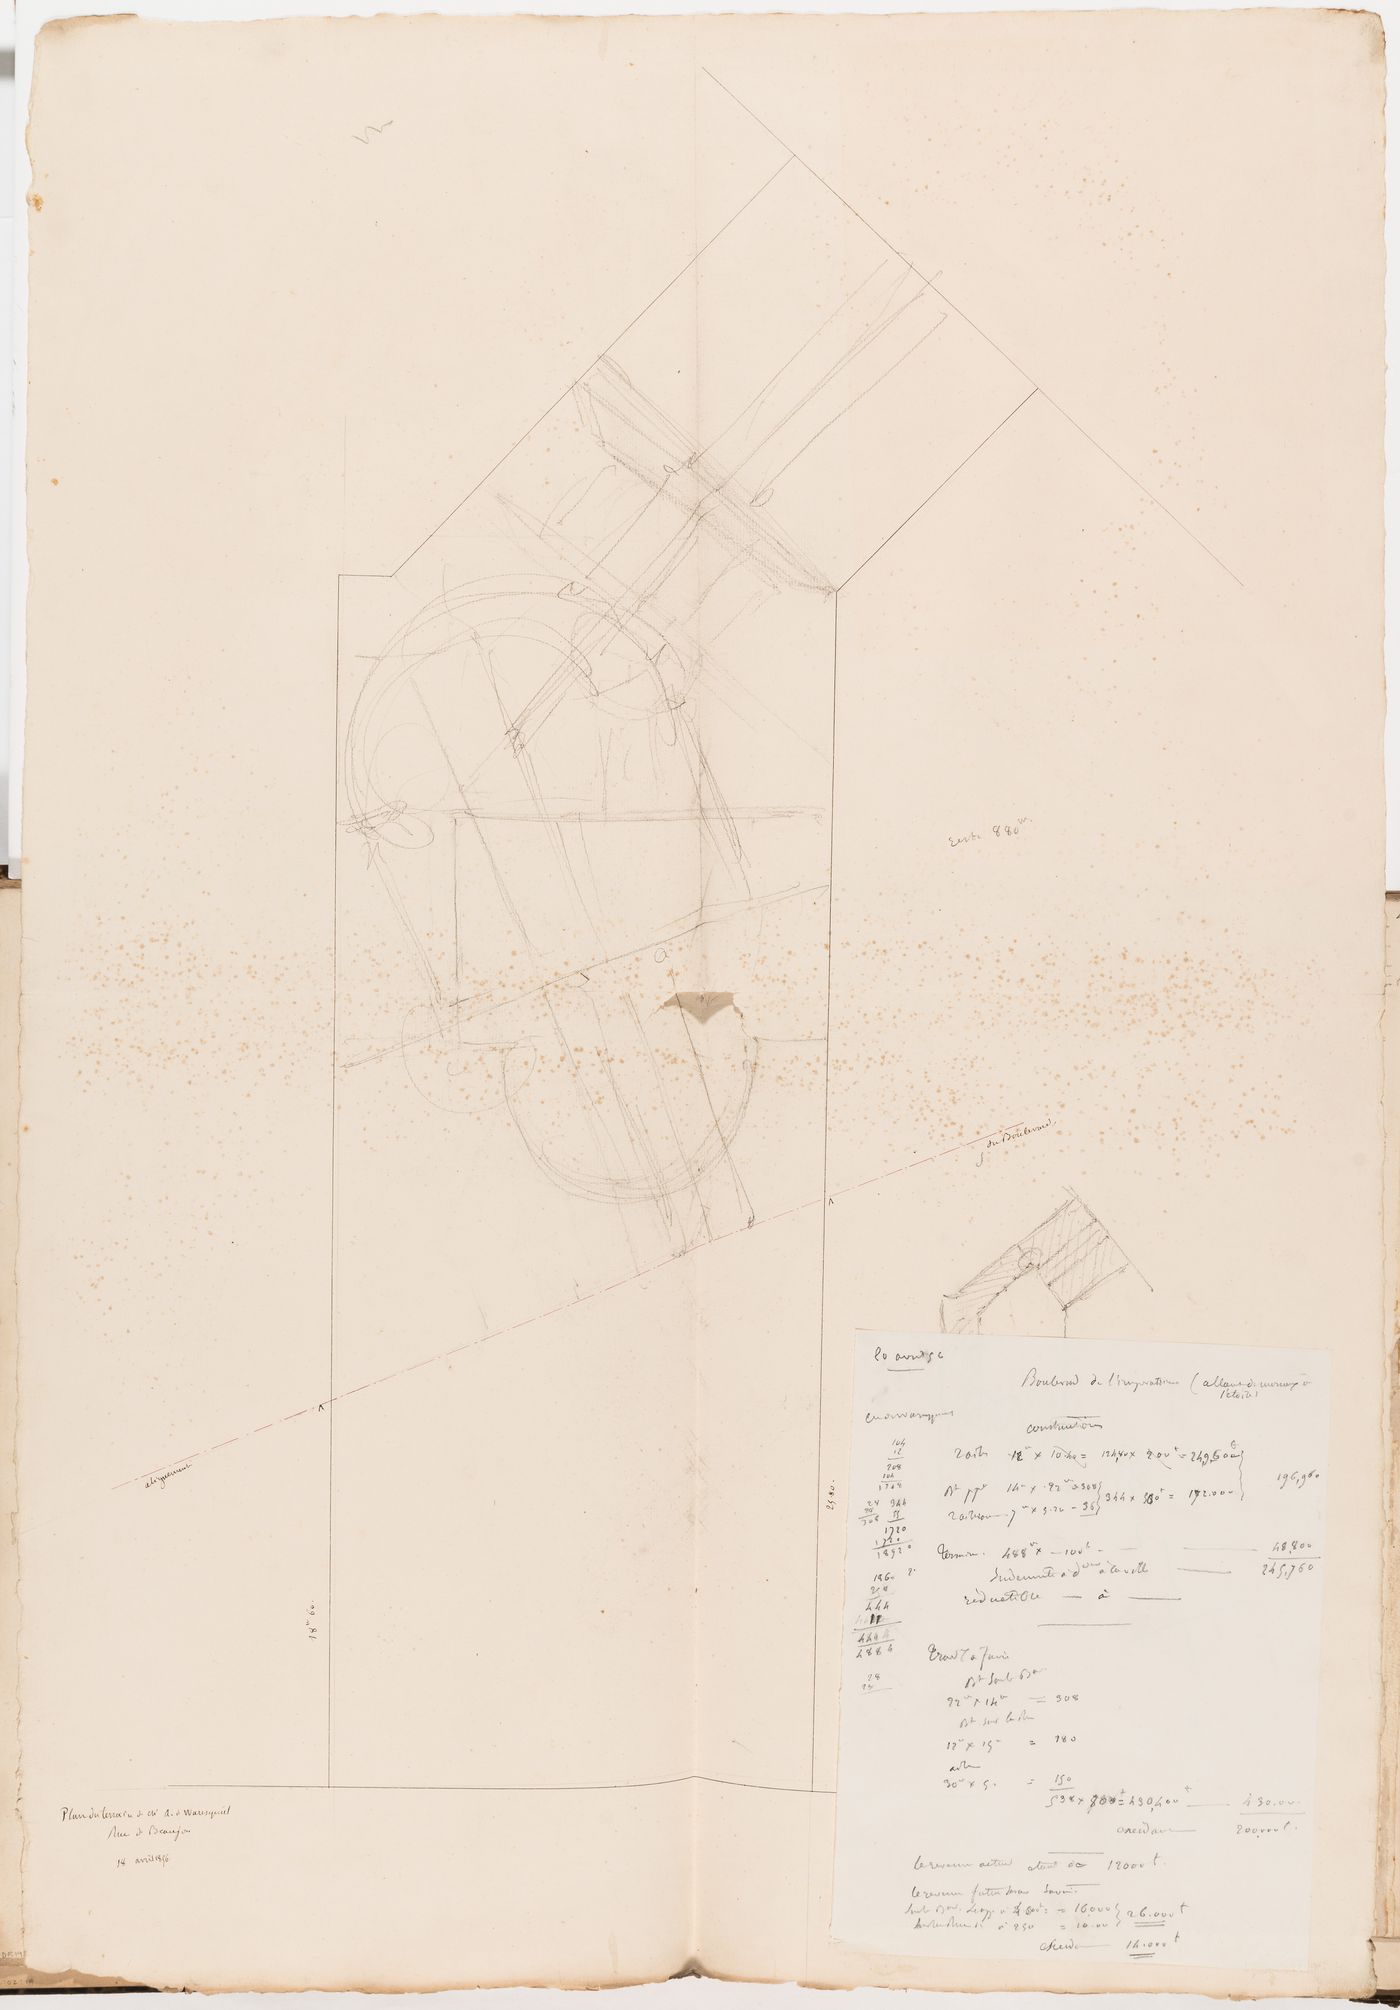 Site plan of Monsieur A. Waresquiel's property, rue de Beaujon, Paris, with sketches for the siting of the house